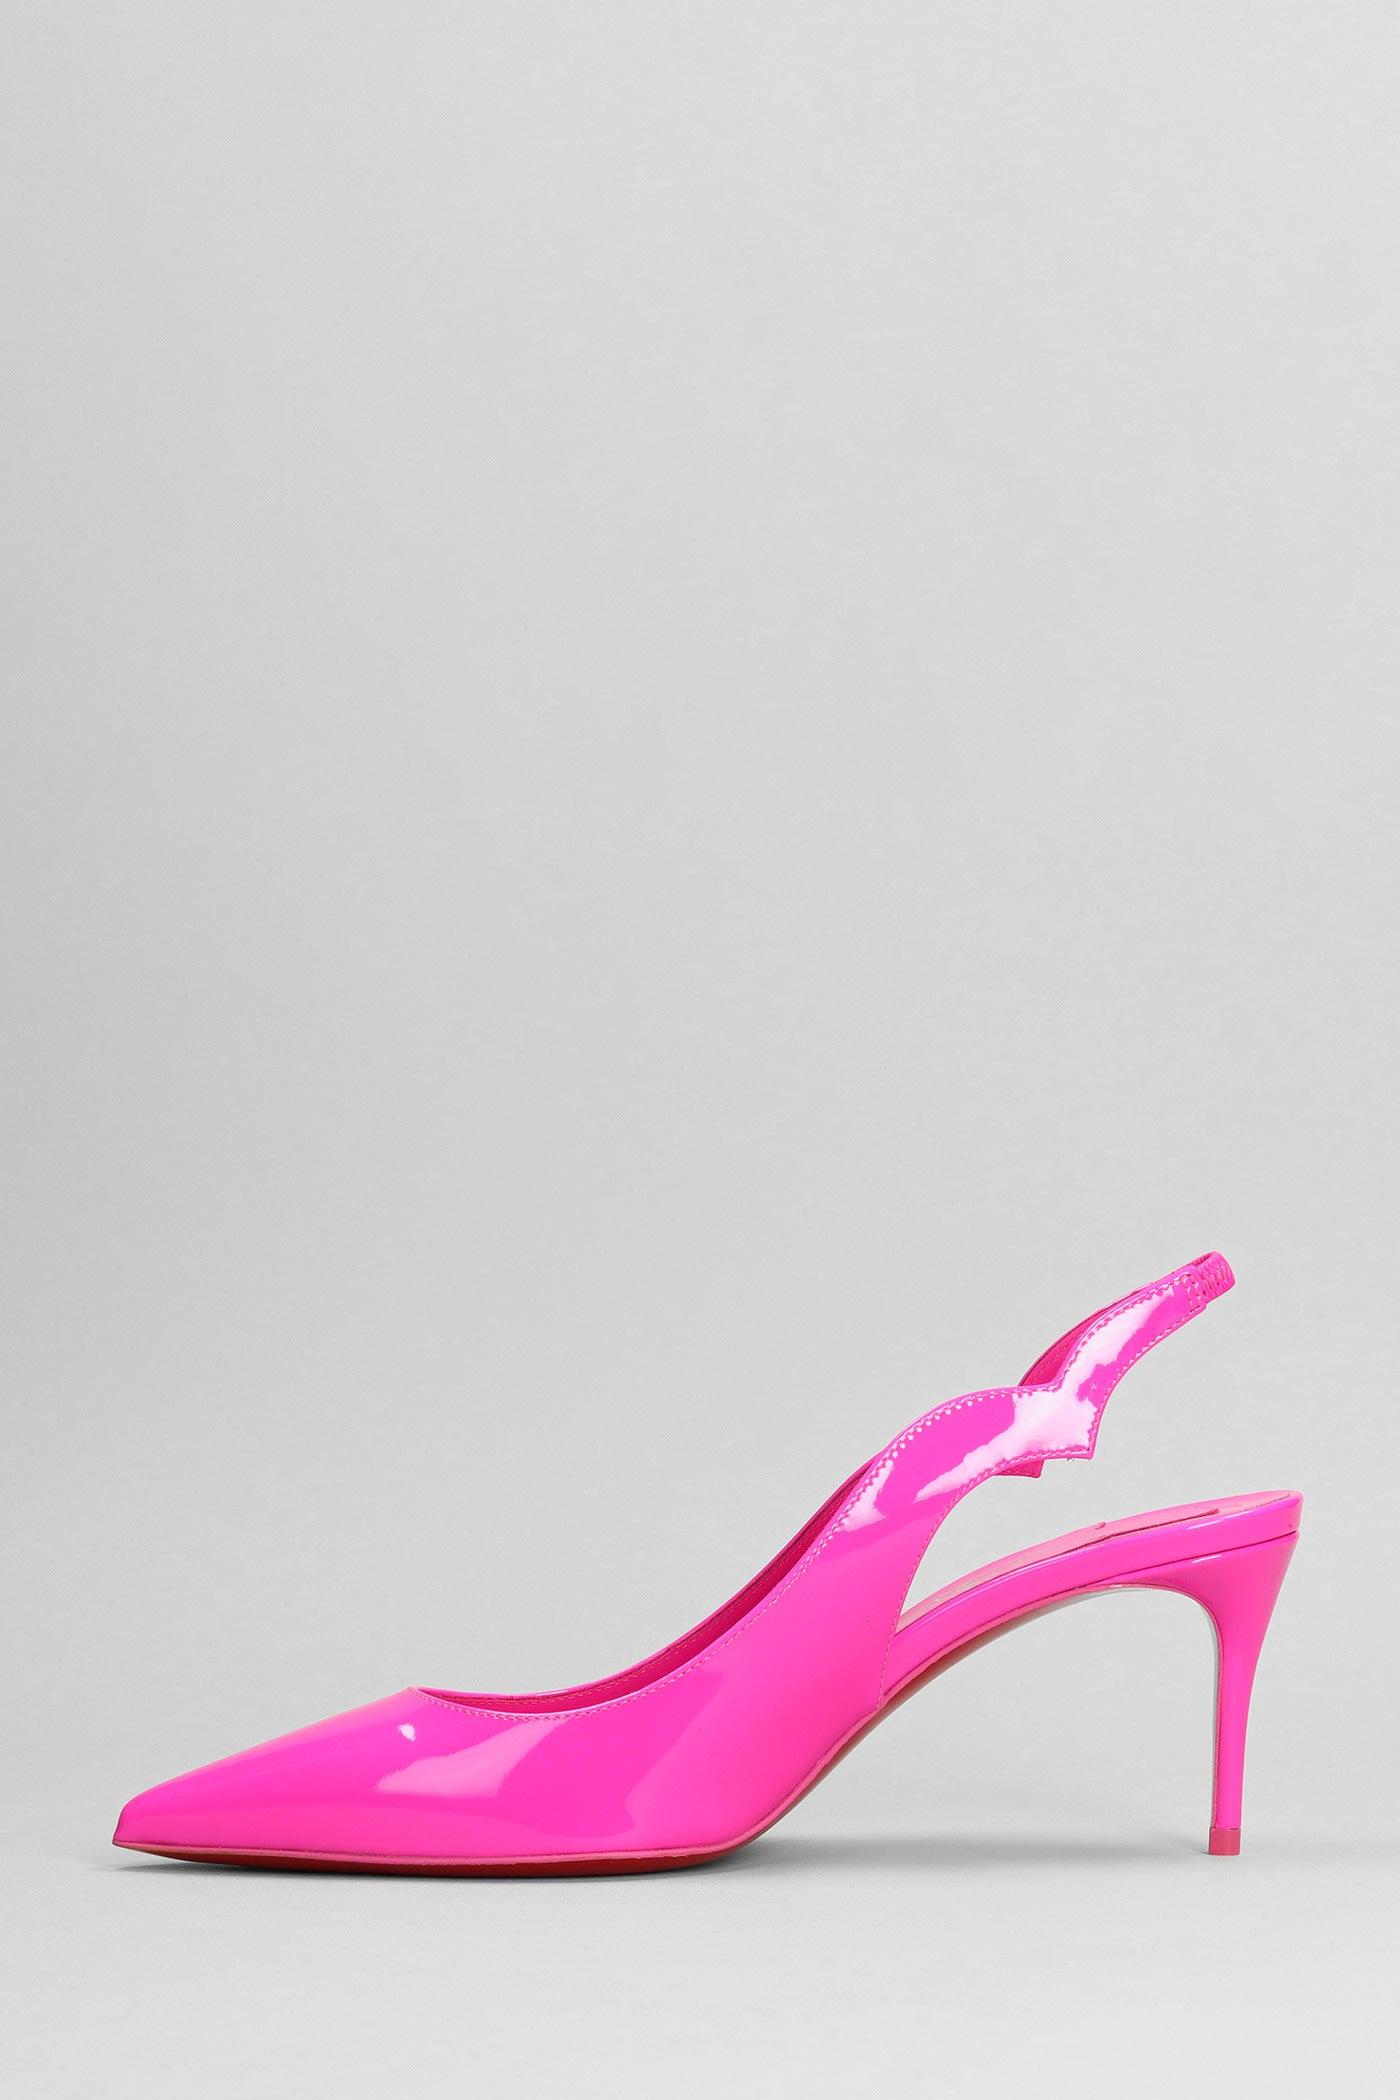 Christian Louboutin Hot Chick Sling Pumps In Patent Leather in Pink | Lyst